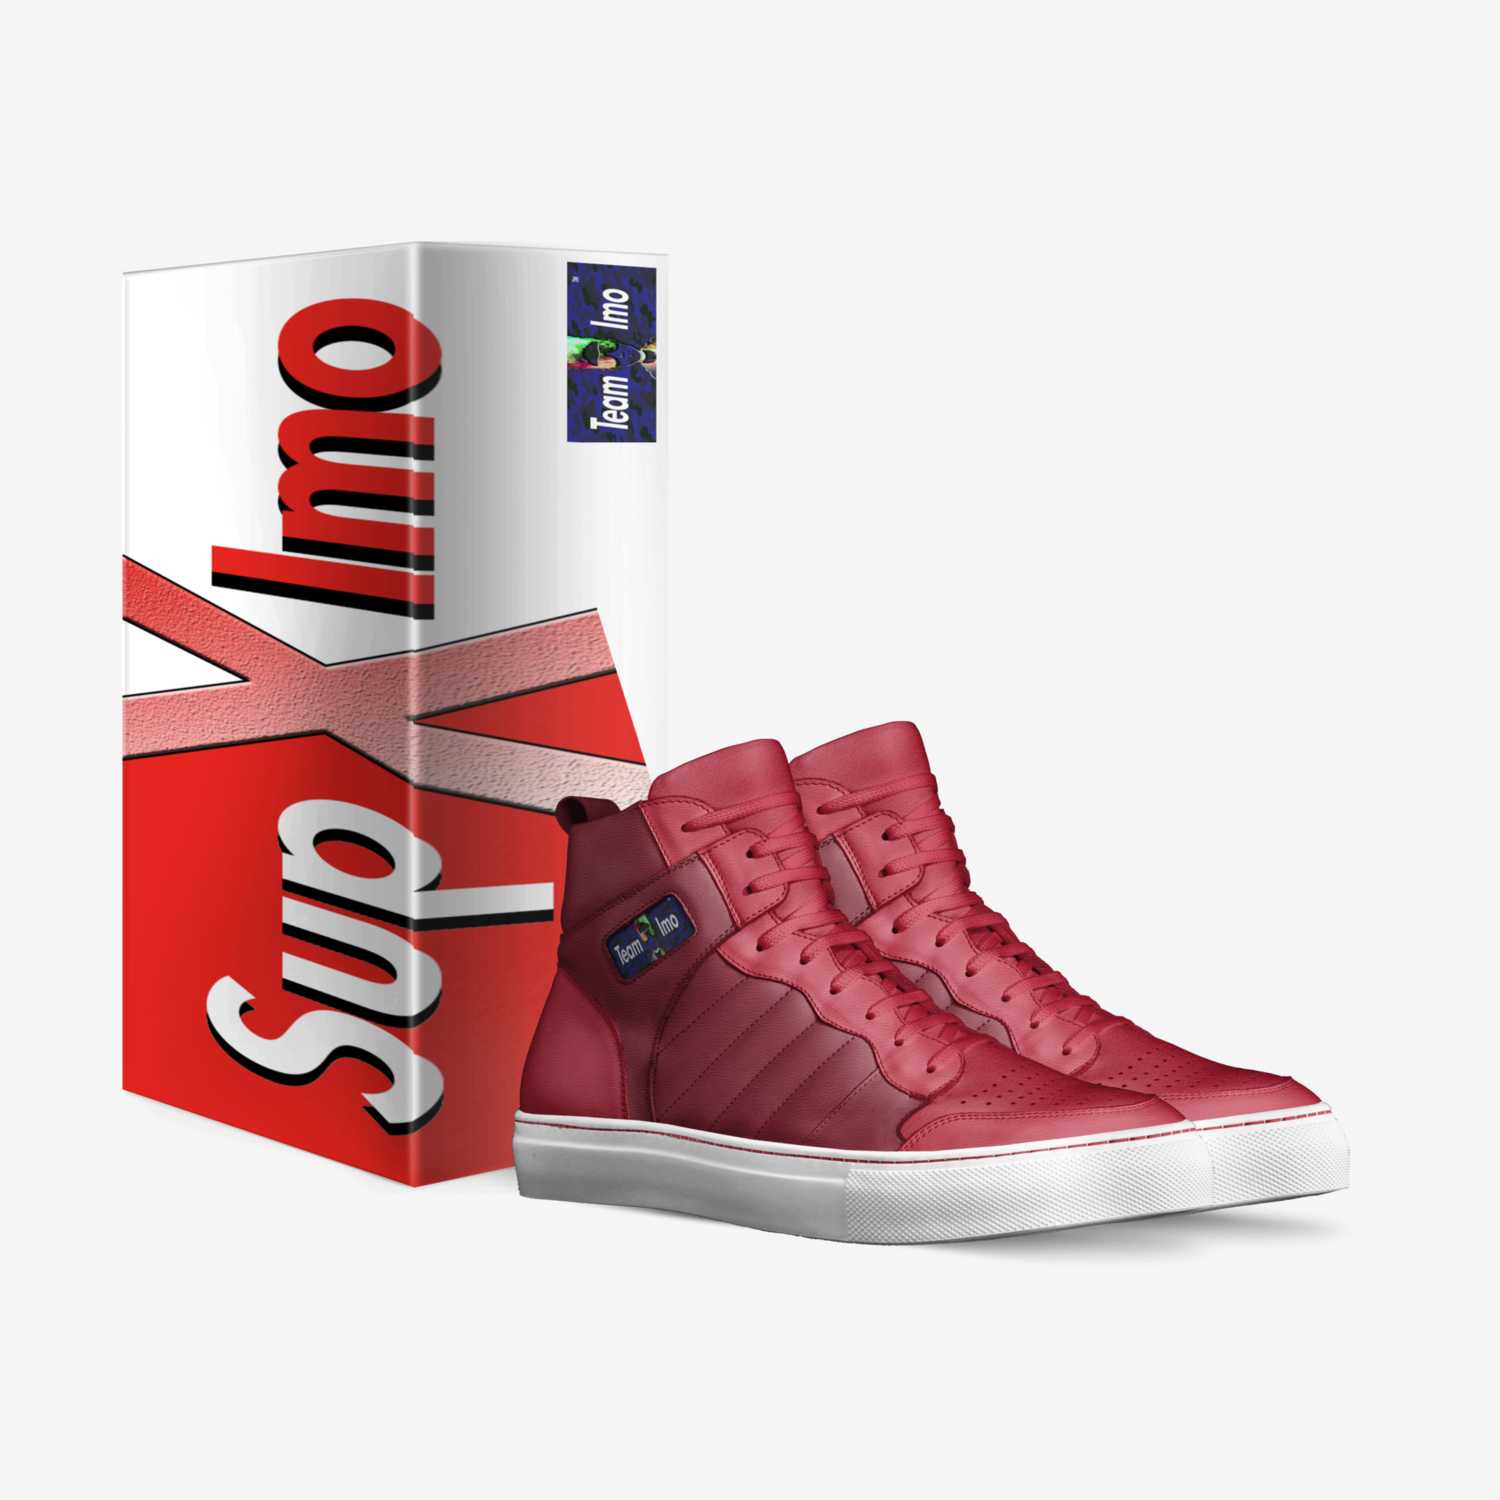 Sup X Imo Infrared custom made in Italy shoes by Imohimi Unuigbe | Box view